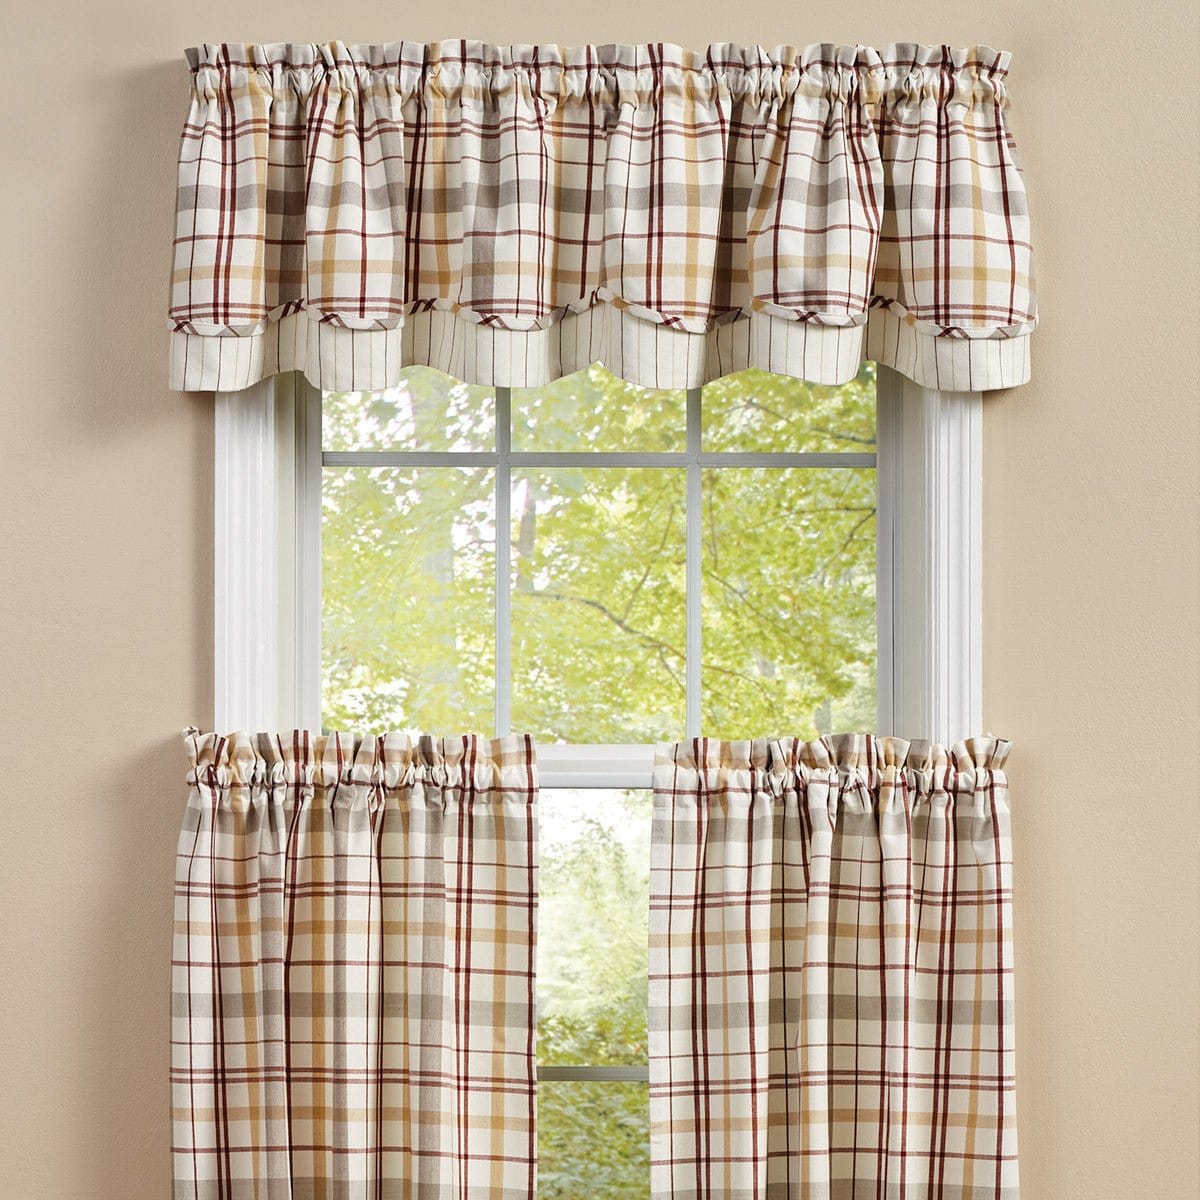 Kingswood Layered Valance Lined-Park Designs-The Village Merchant